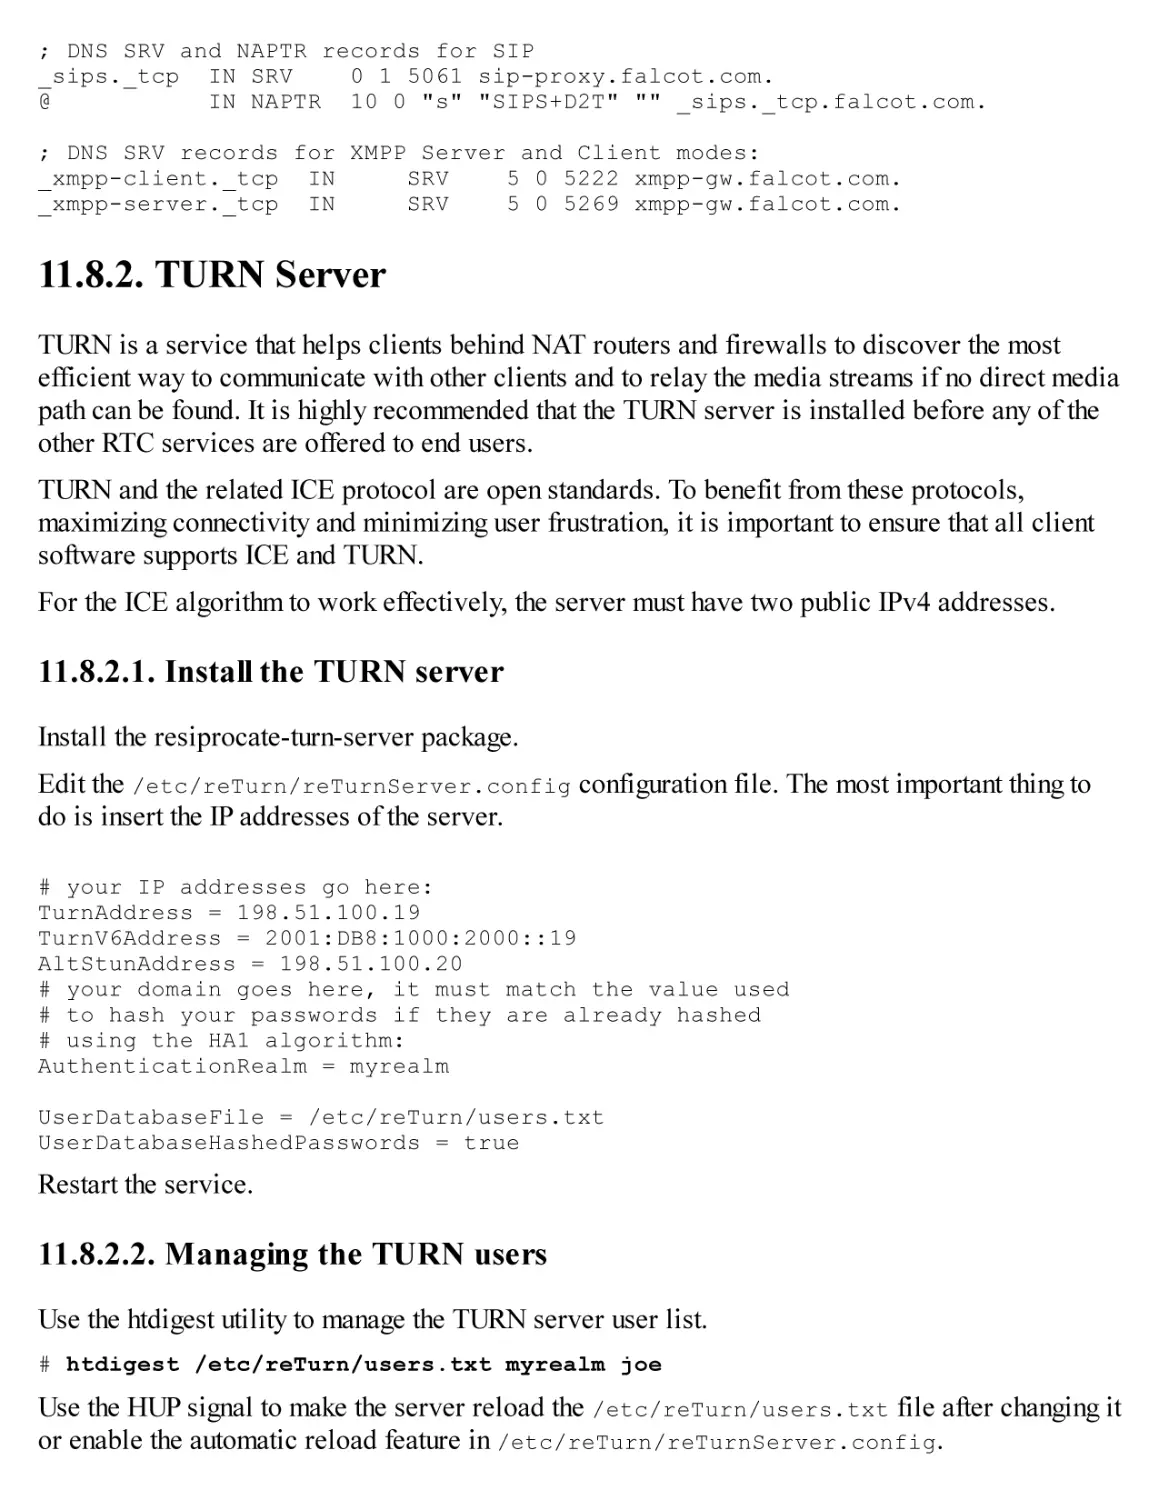 11.8.2. TURN Server
11.8.2.1. Install the TURN server
11.8.2.2. Managing the TURN users